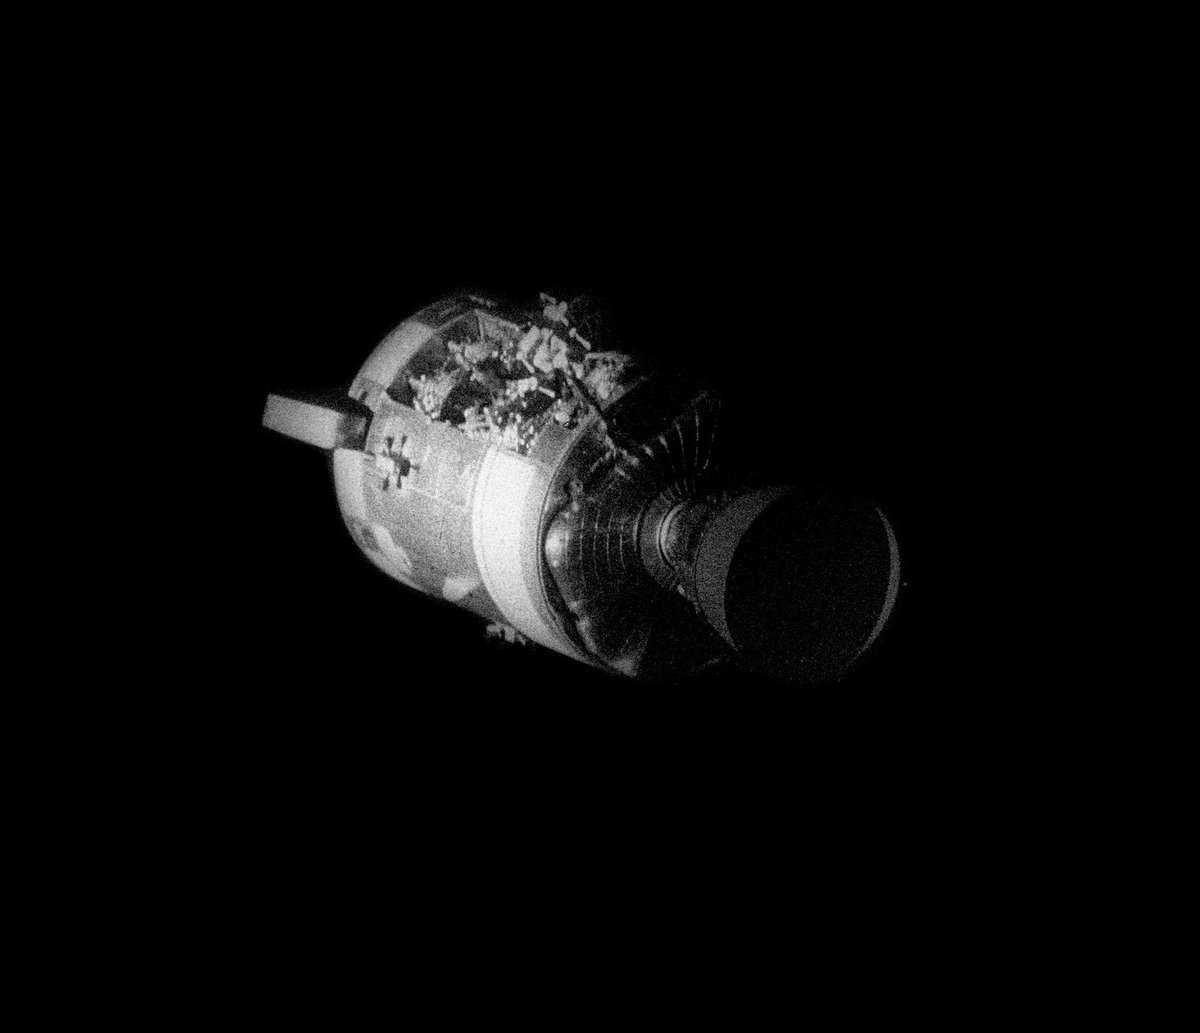 On this day 1970 - Apollo 13 Explosion After a routine stir of an oxygen tank, damaged wiring insulation caused an explosion which depleted both of the Service Module’s oxygen tanks into space. The crew had to shut down the Command Module and move into the Lunar Module which